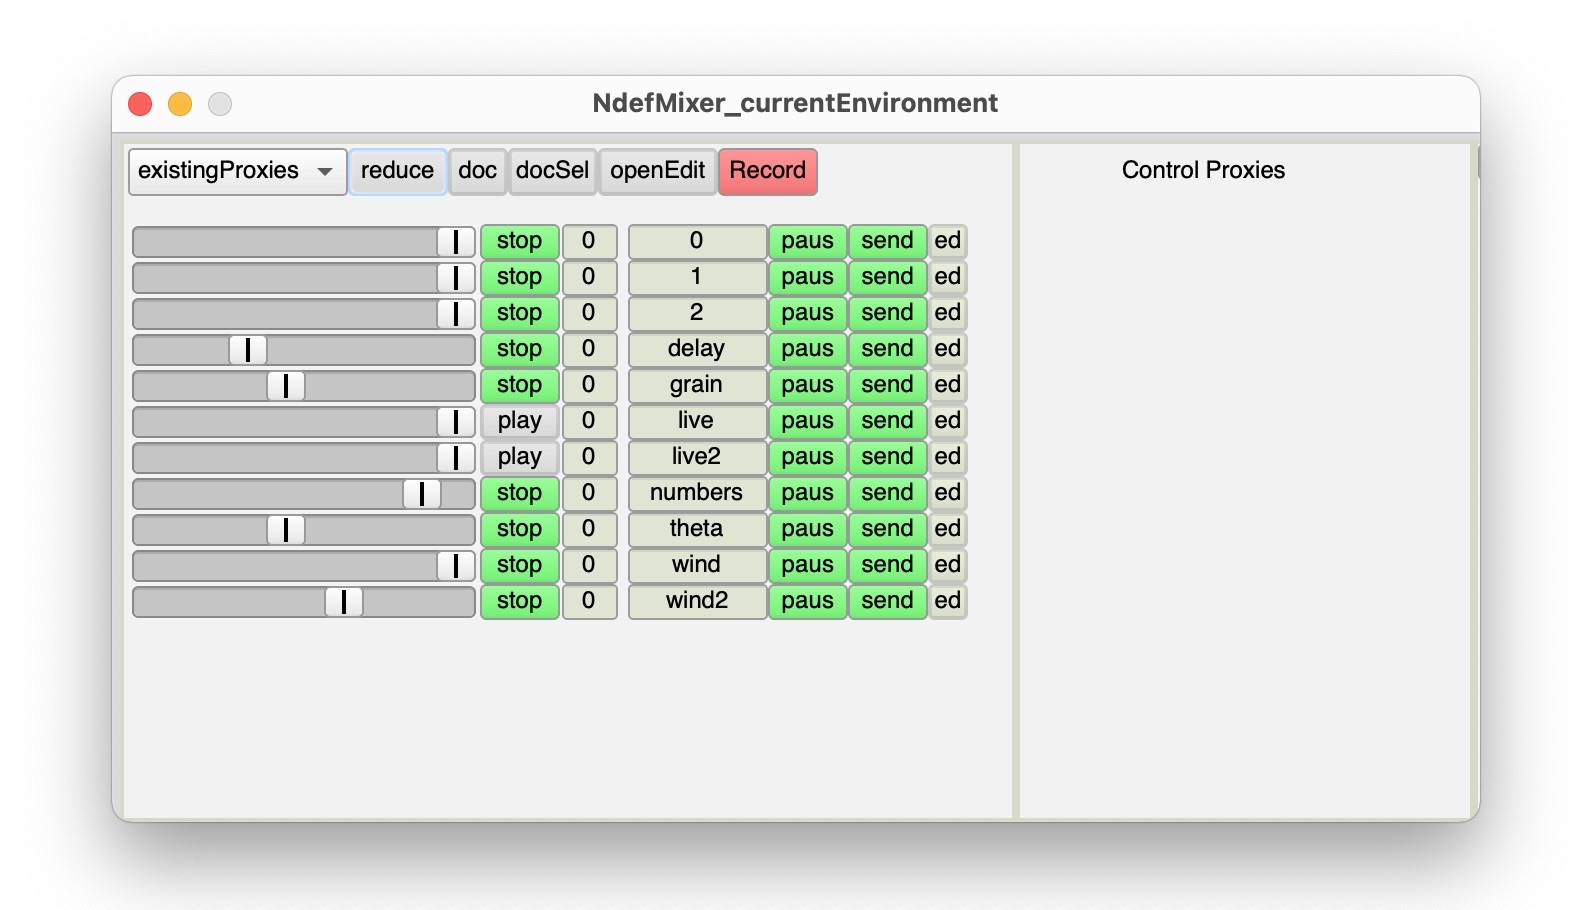 BCMI-2's NdefMixer GUI in the performance.